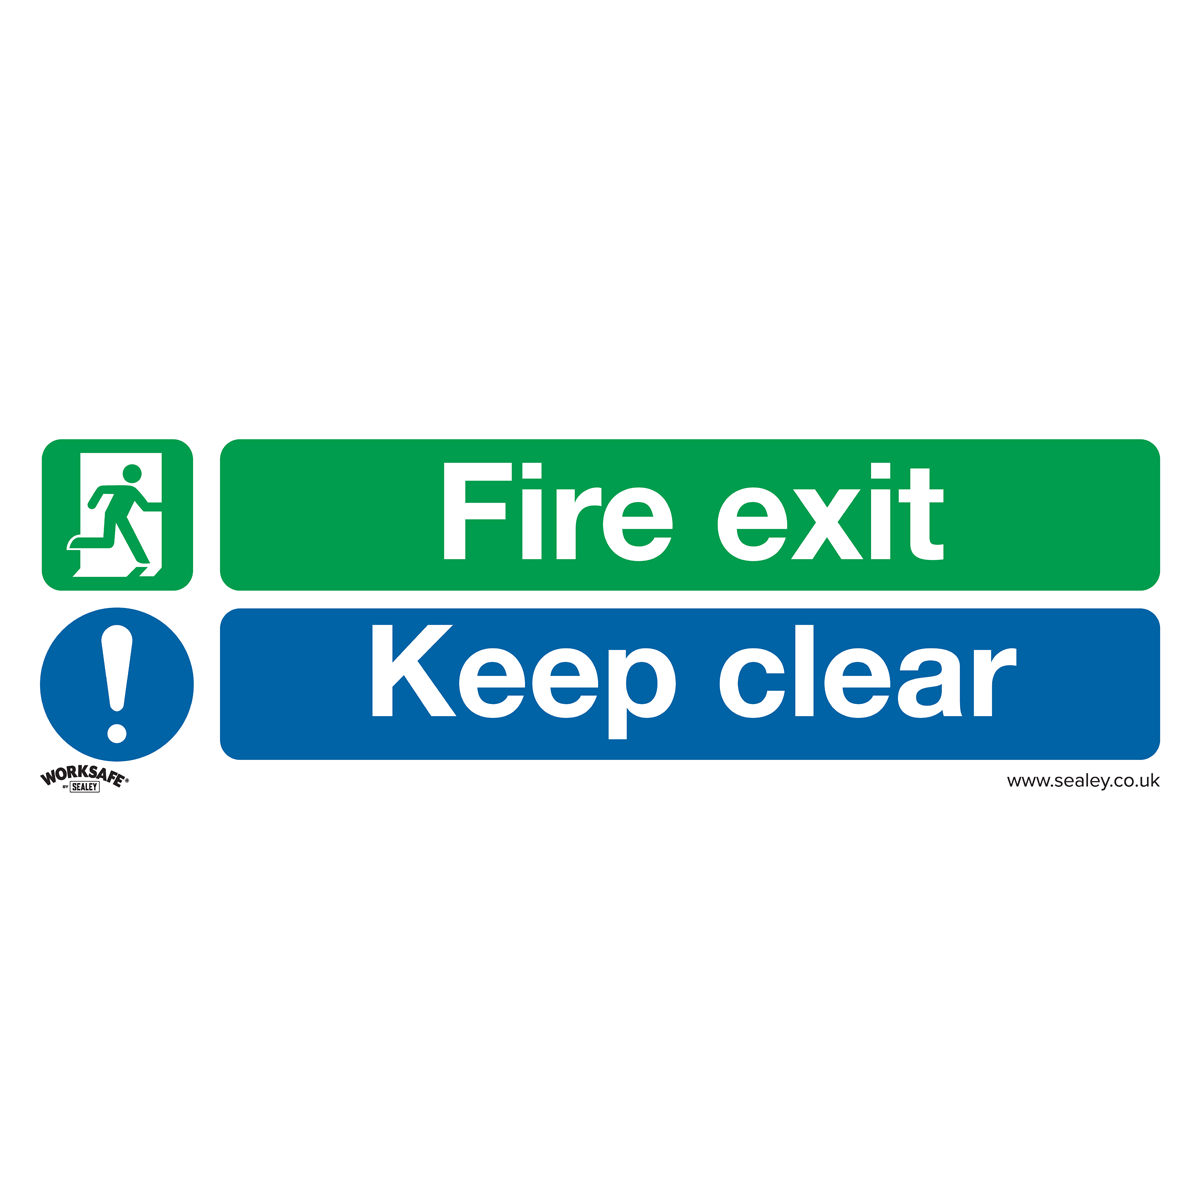 Sealey Safe Conditions Safety Sign - Fire Exit Keep Clear (Large) - Self-Adhesive Vinyl